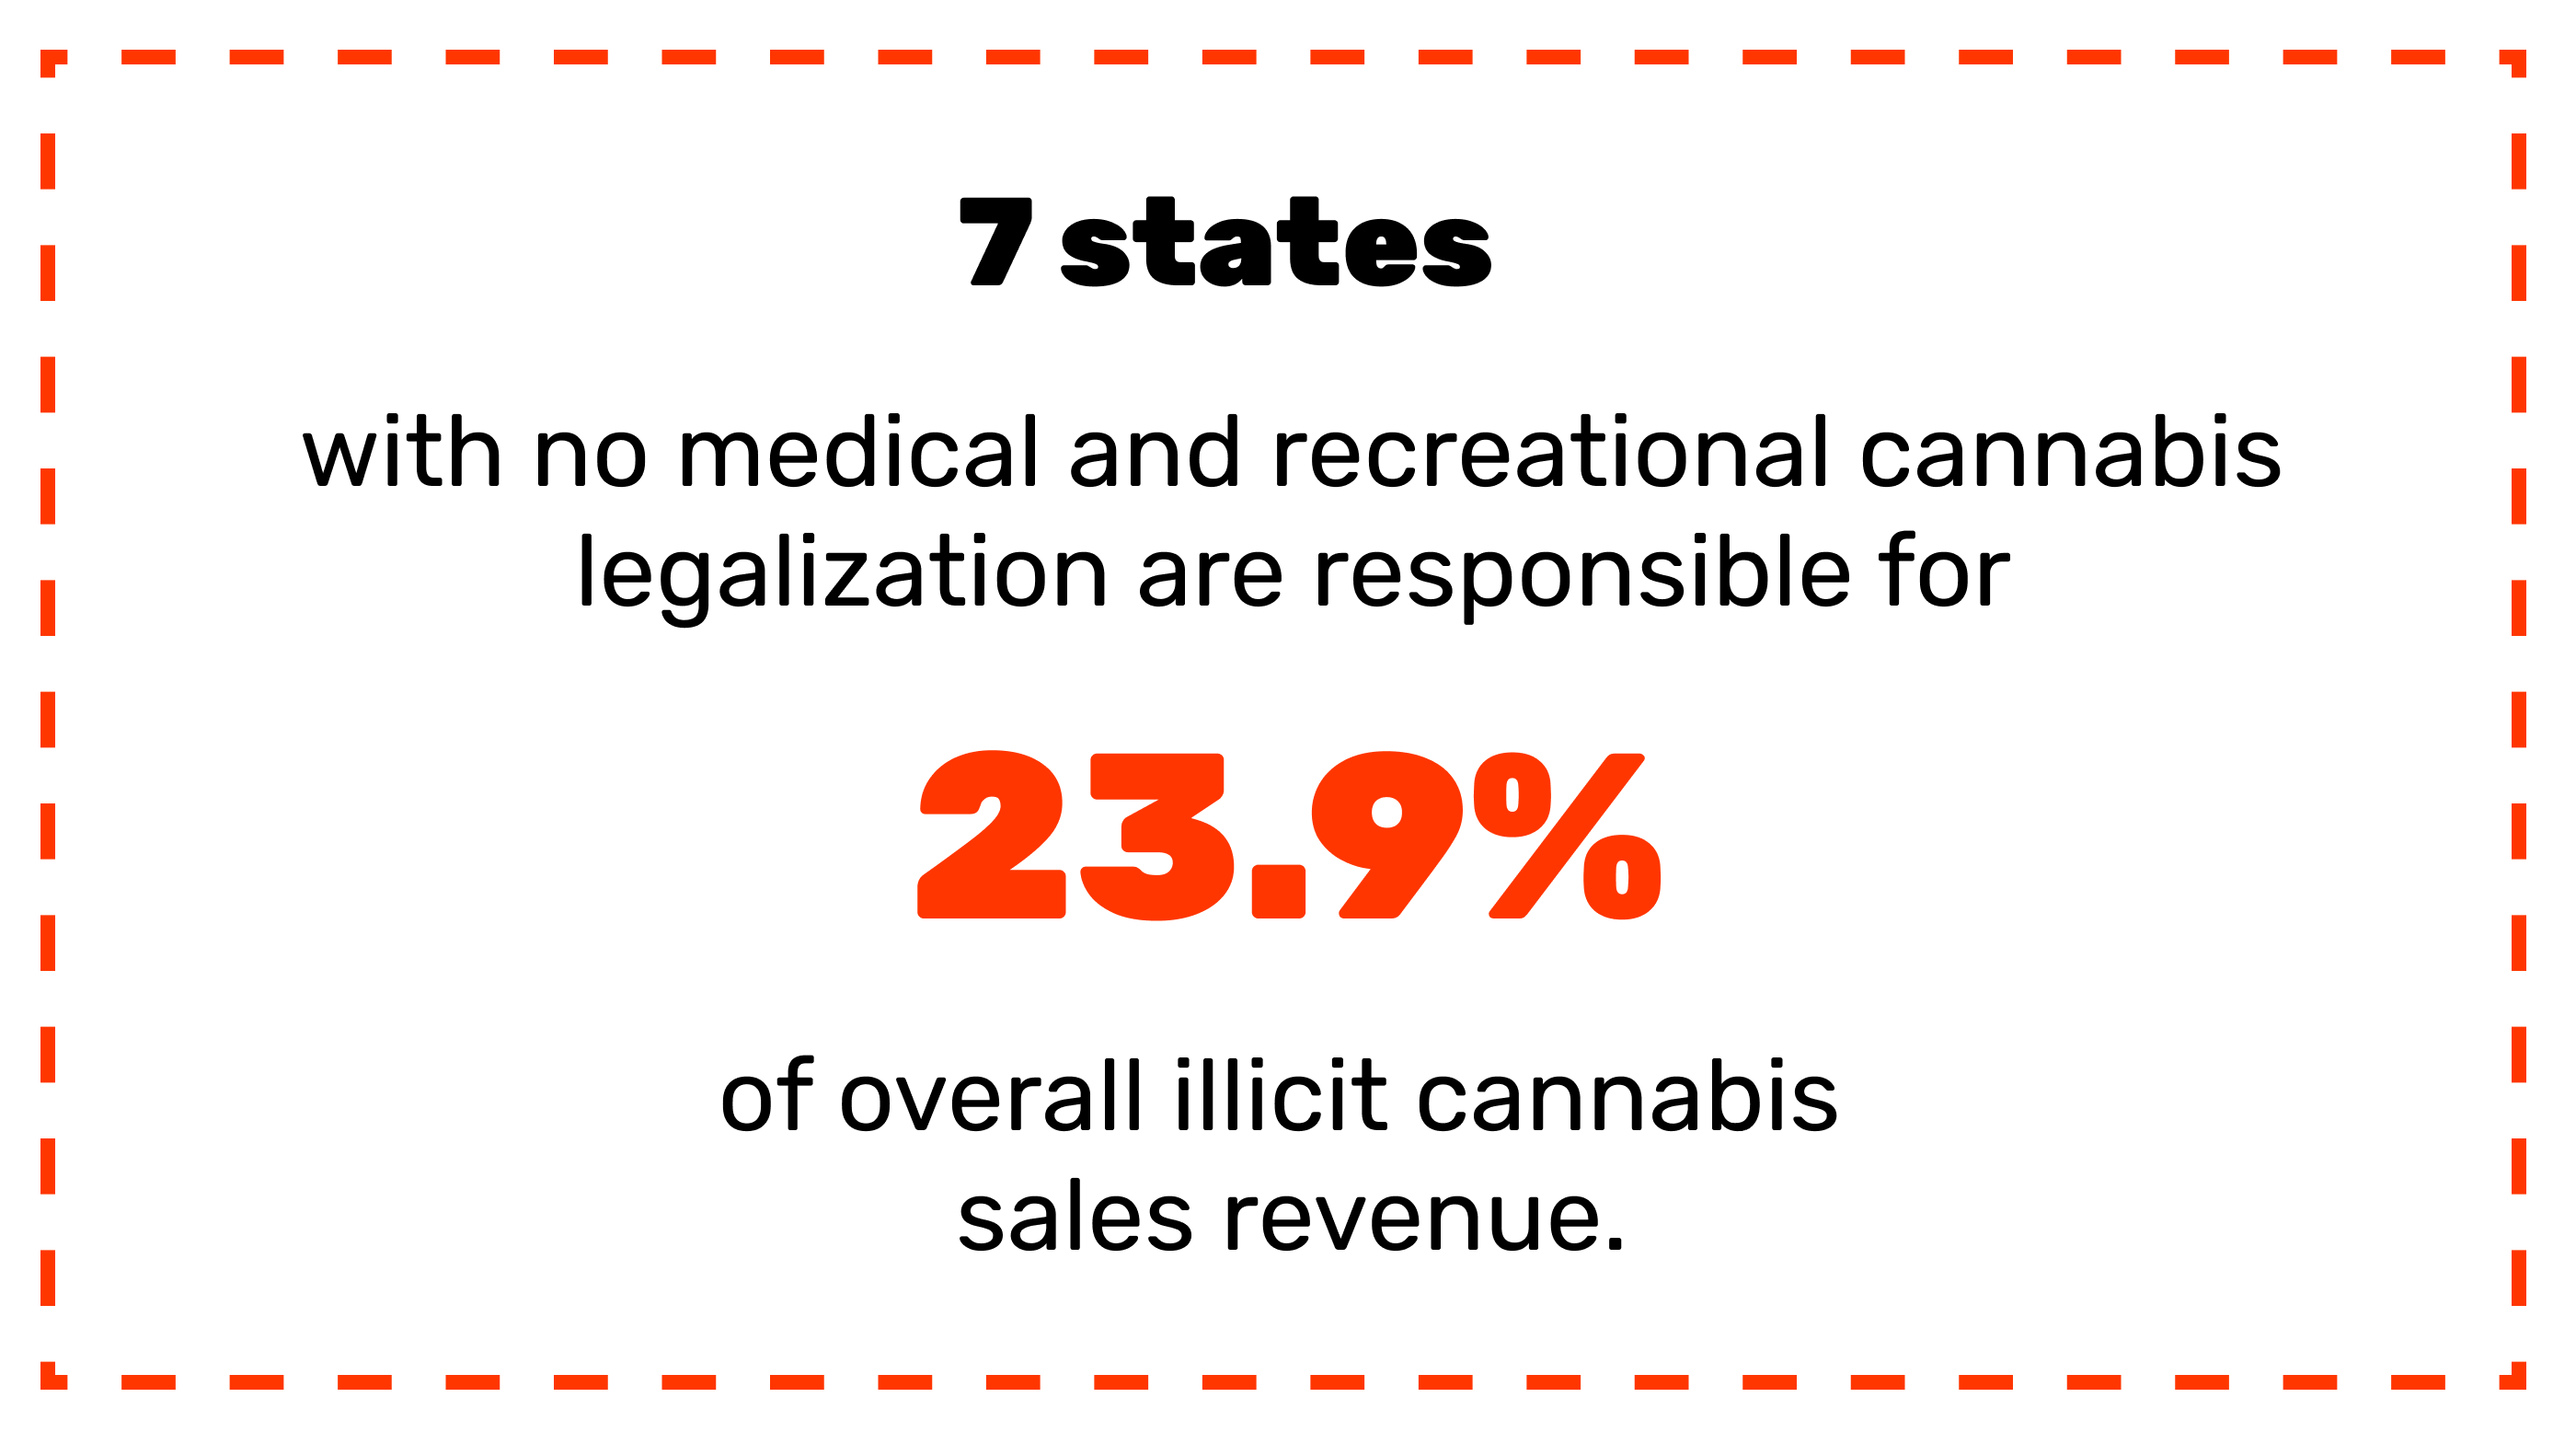 Legal v.s. illicit  cannabis sales 2020 in the U.S.